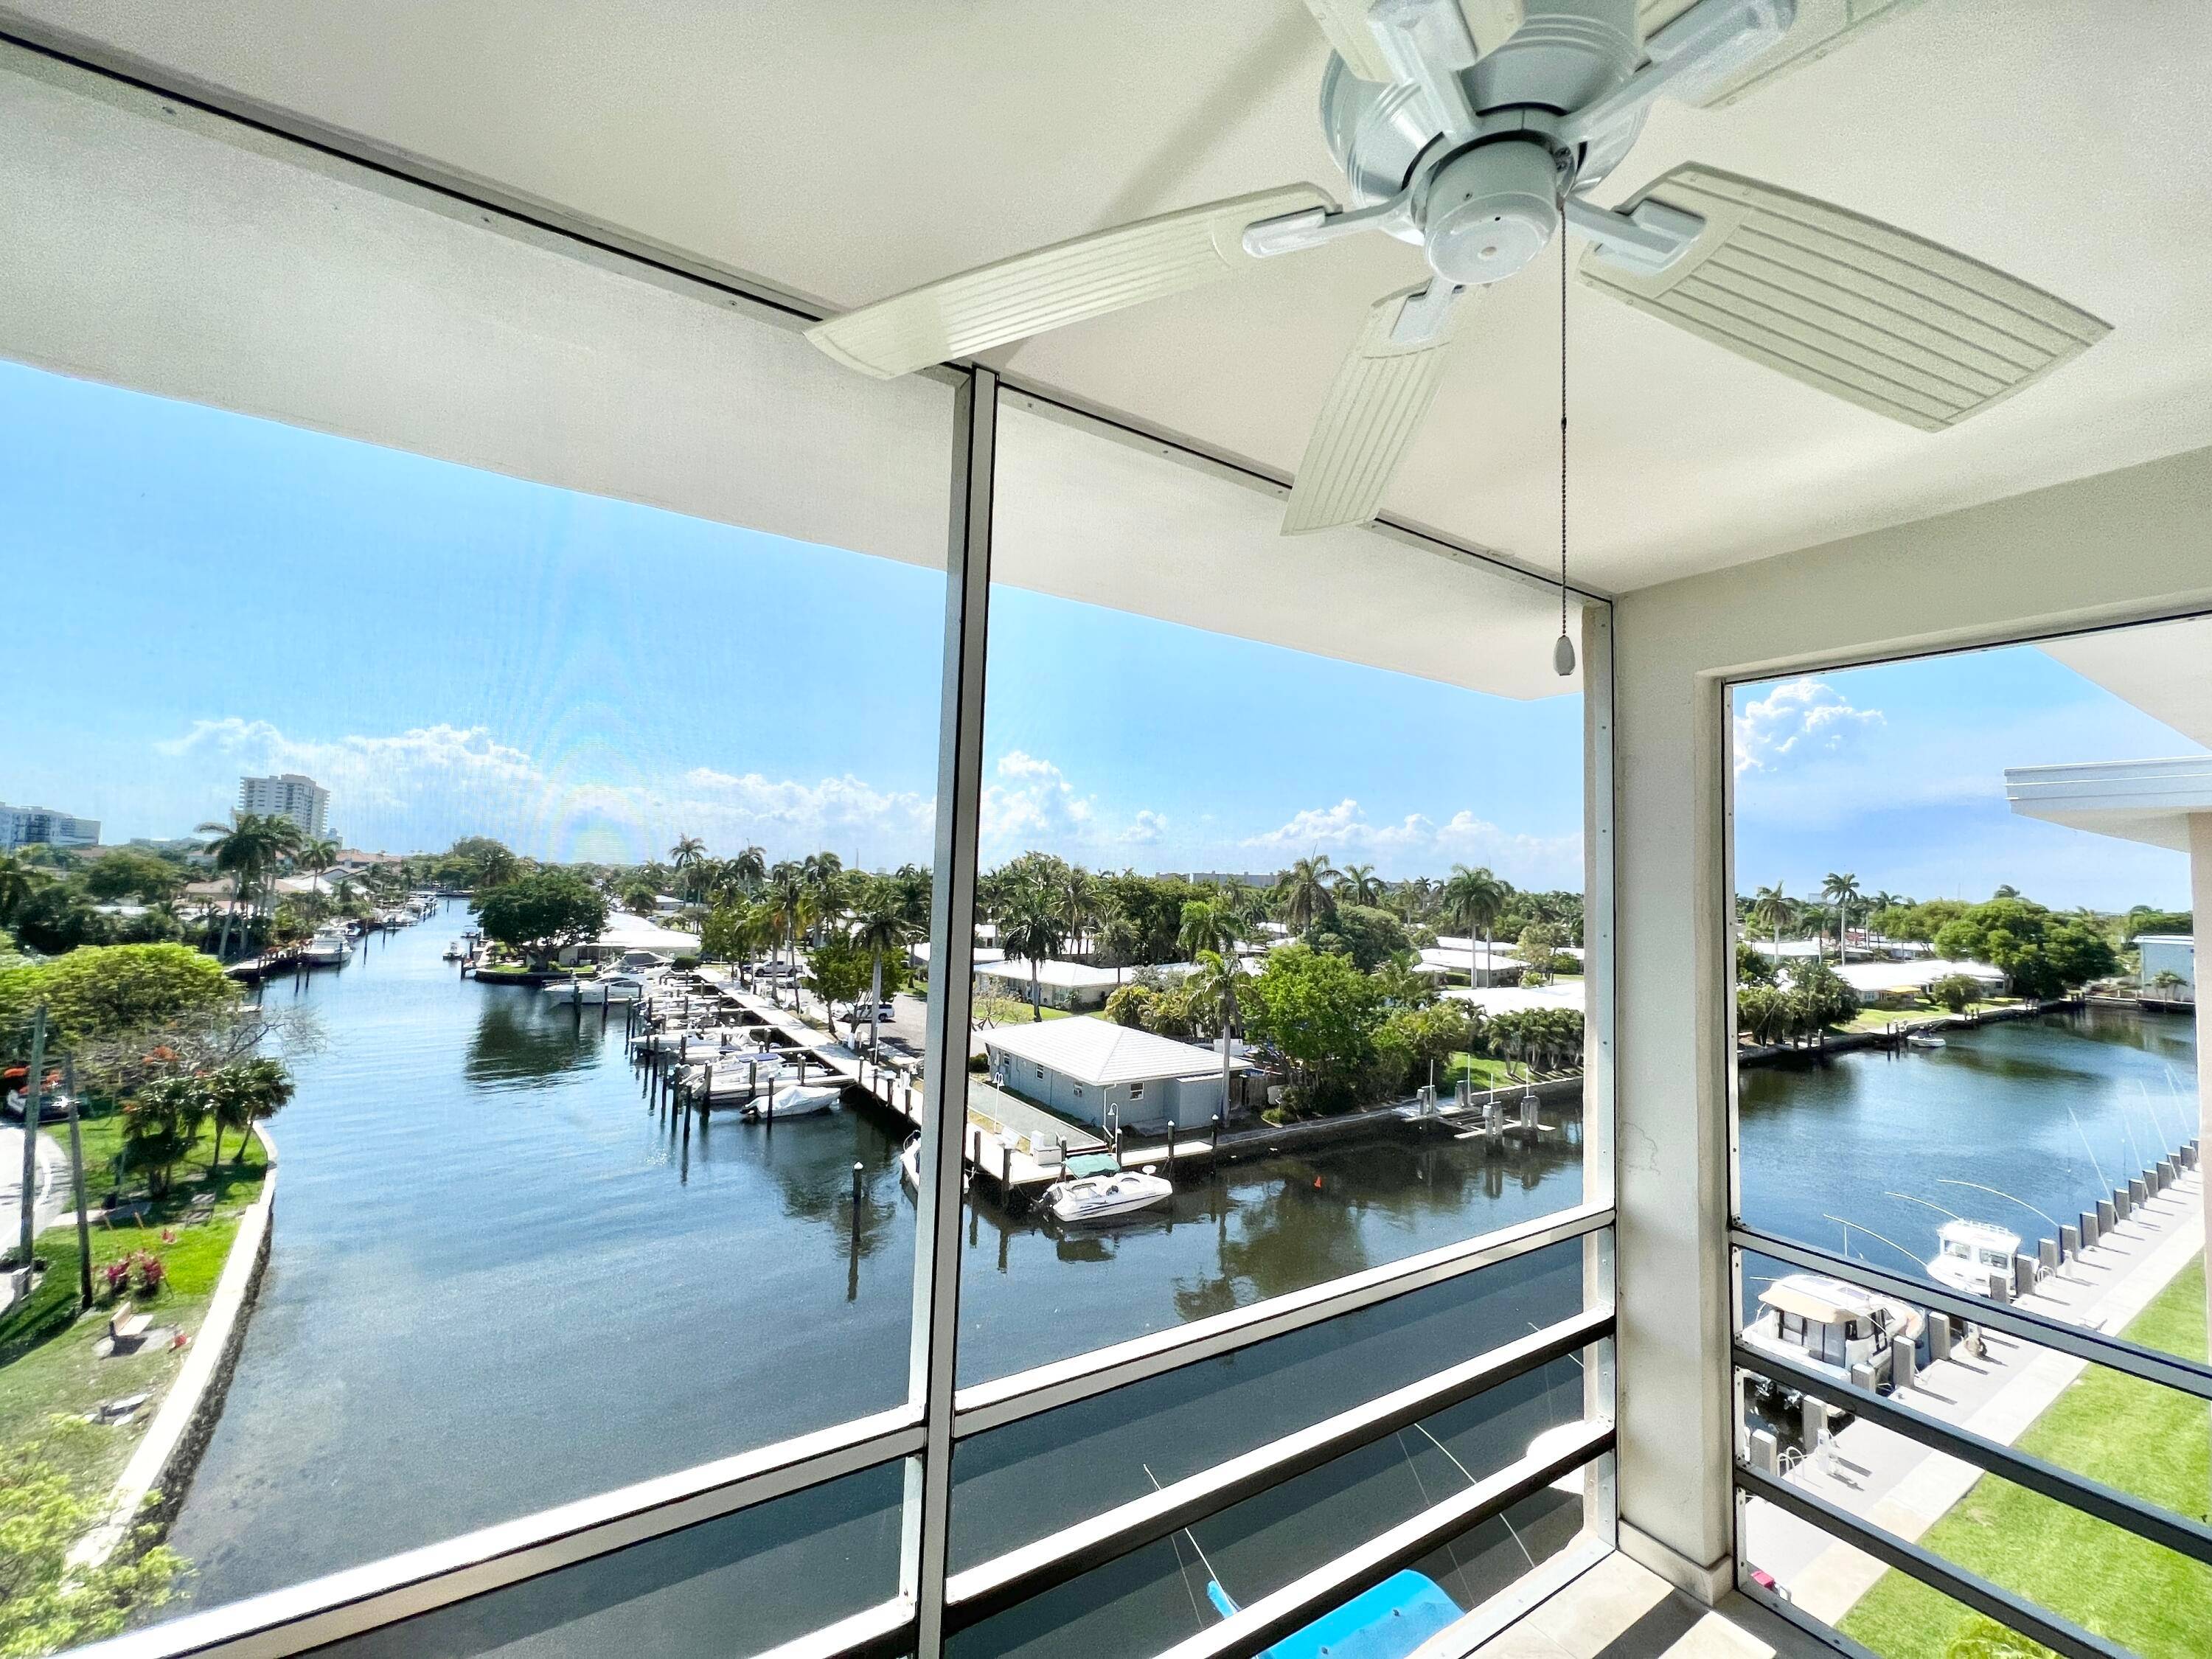 Exquisitely remodeled 2 Bedroom 2 Bath condo with Ocean and Intracoastal view.